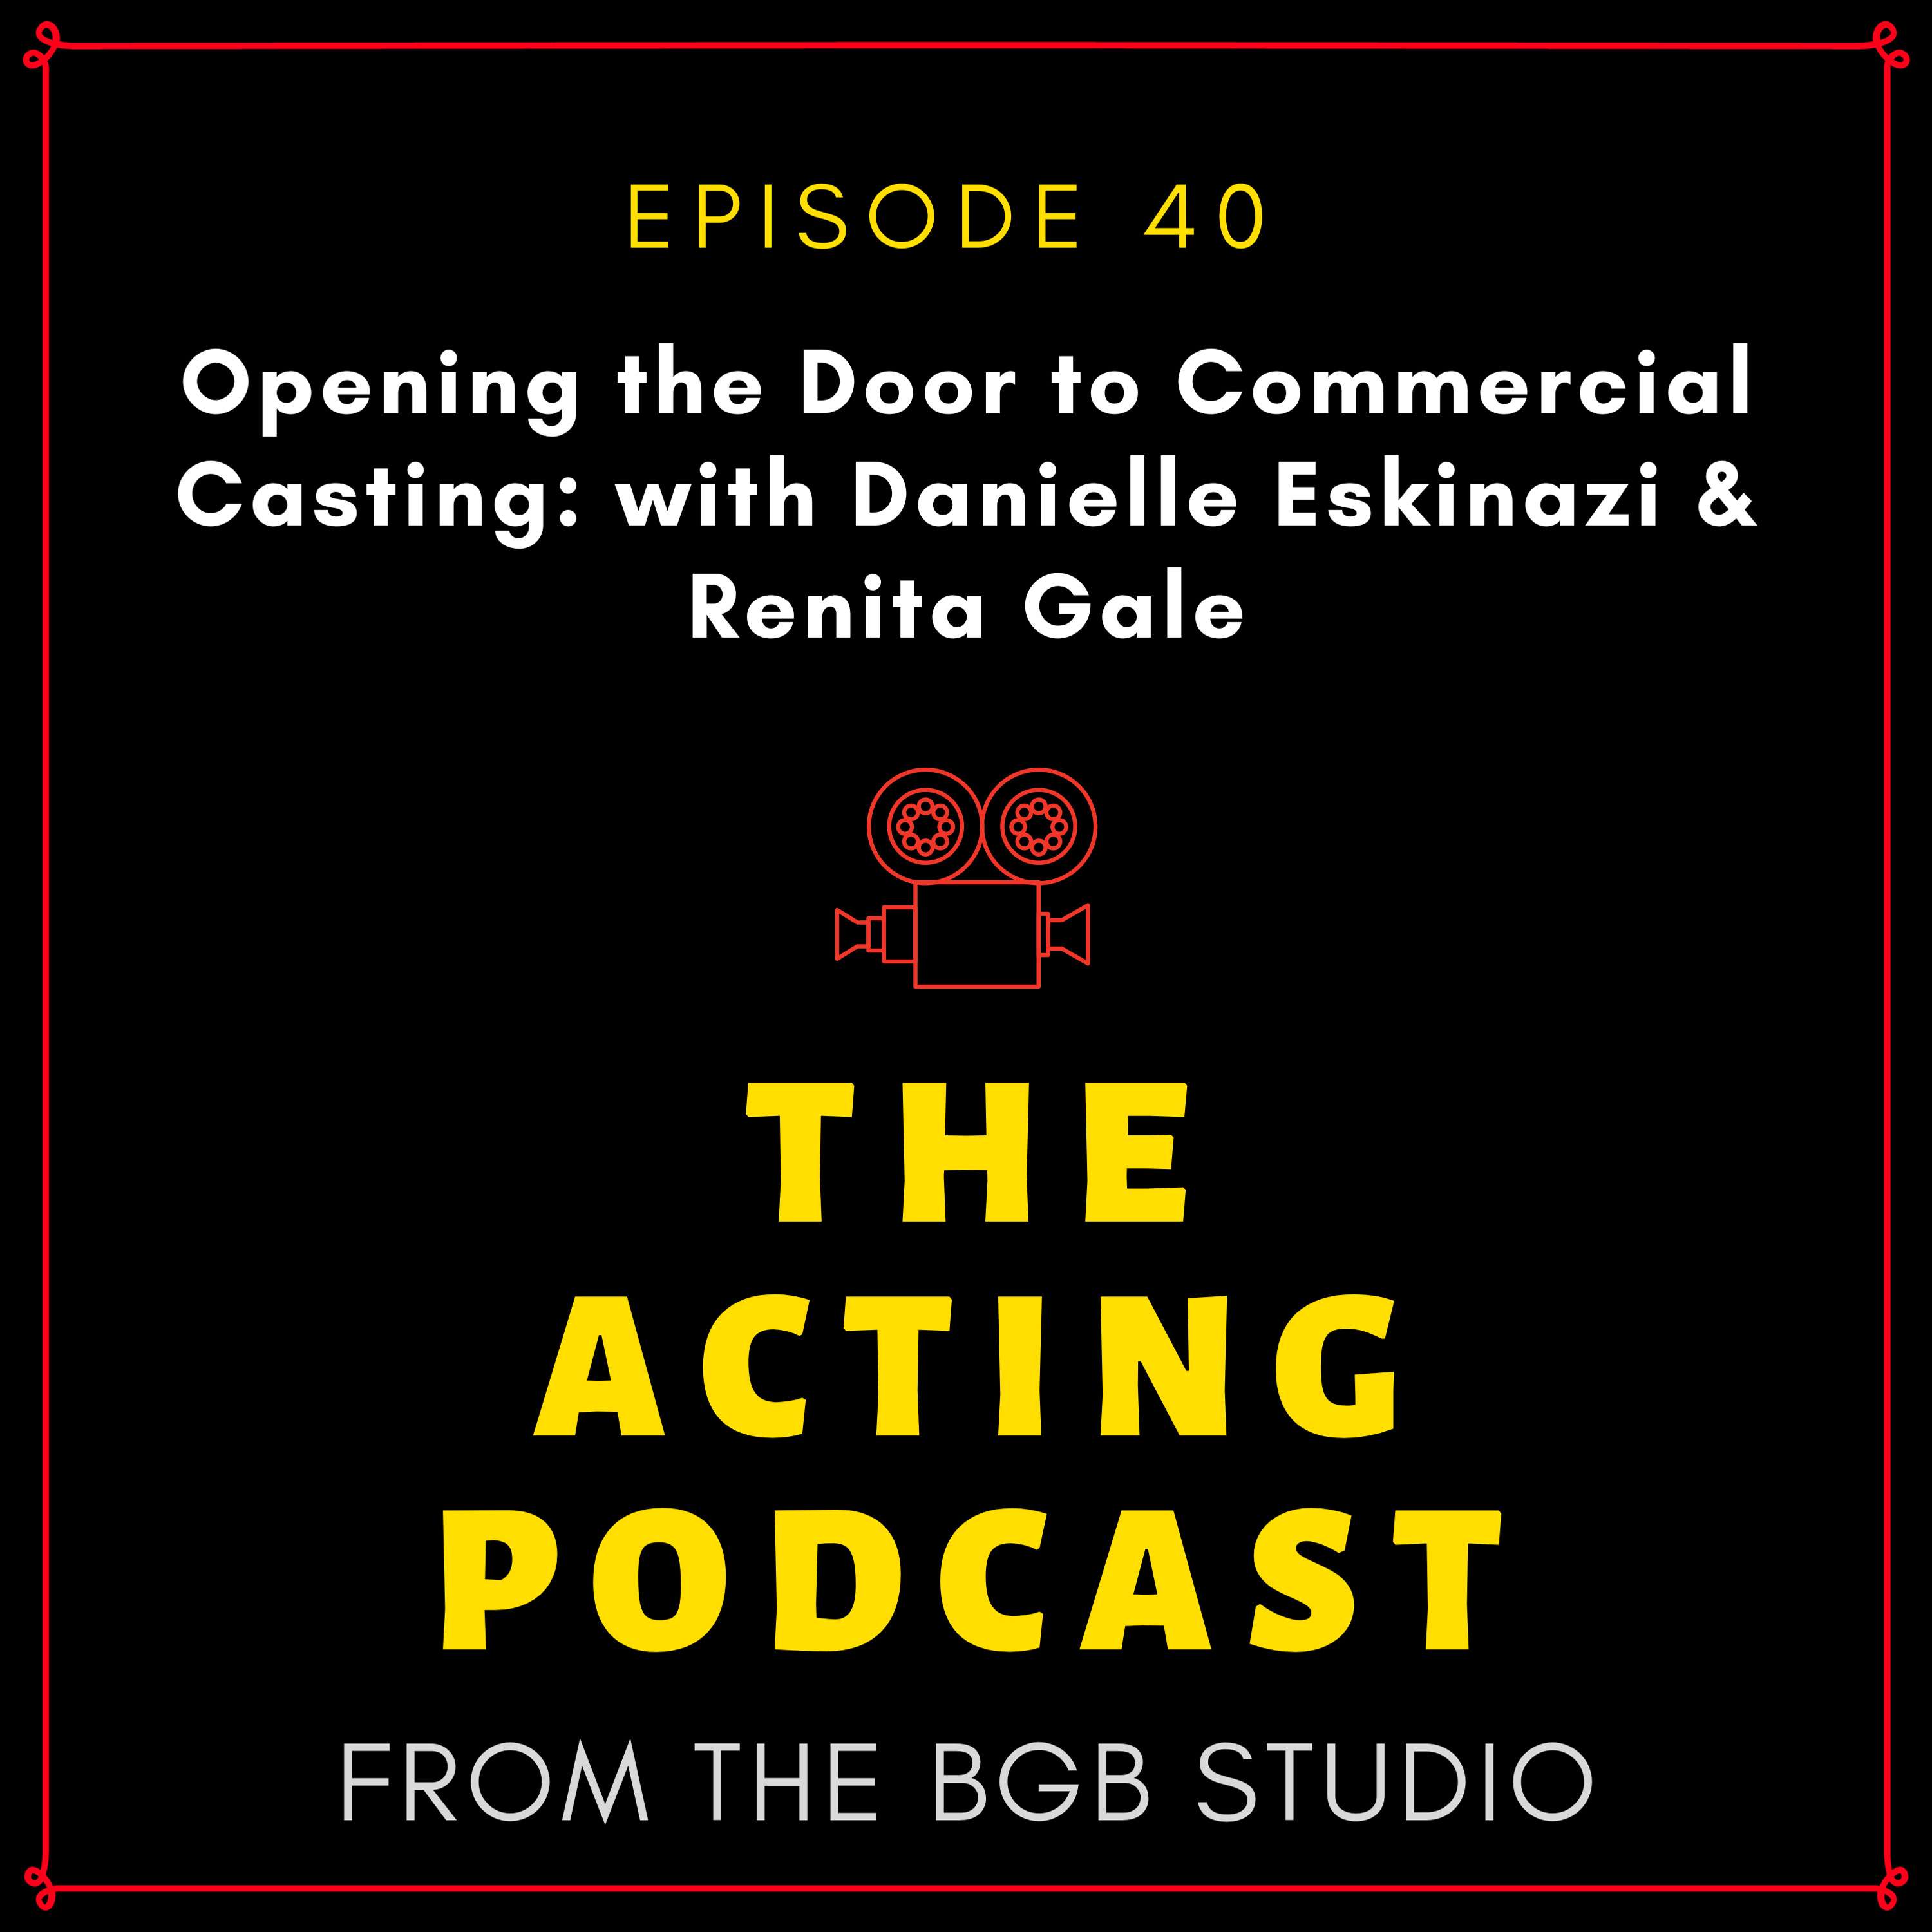 Ep. 40: Opening the Door to Commercial Casting: with Danielle Eskinazi & Renita Gale